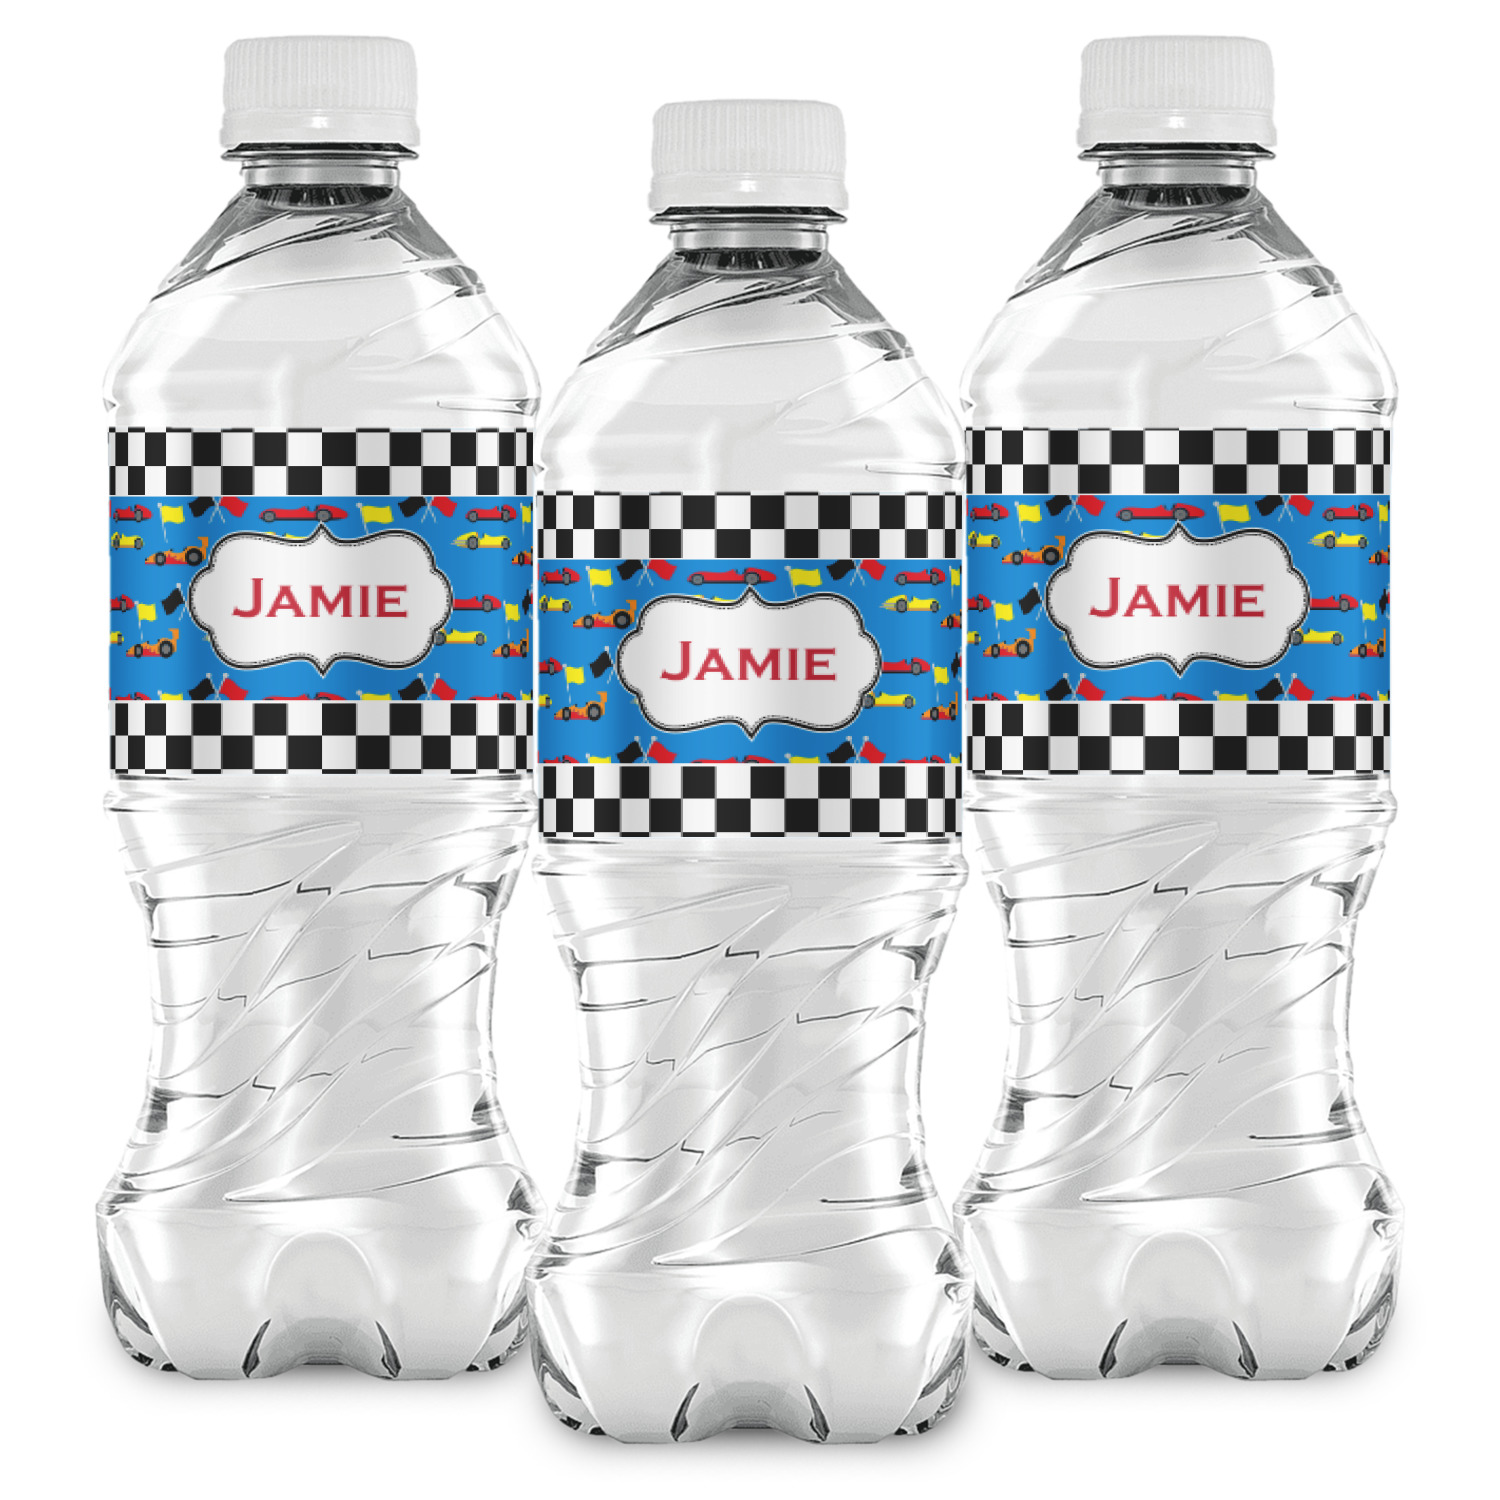 https://www.youcustomizeit.com/common/MAKE/357472/Checkers-Racecars-Water-Bottle-Labels-Front-View.jpg?lm=1653682822